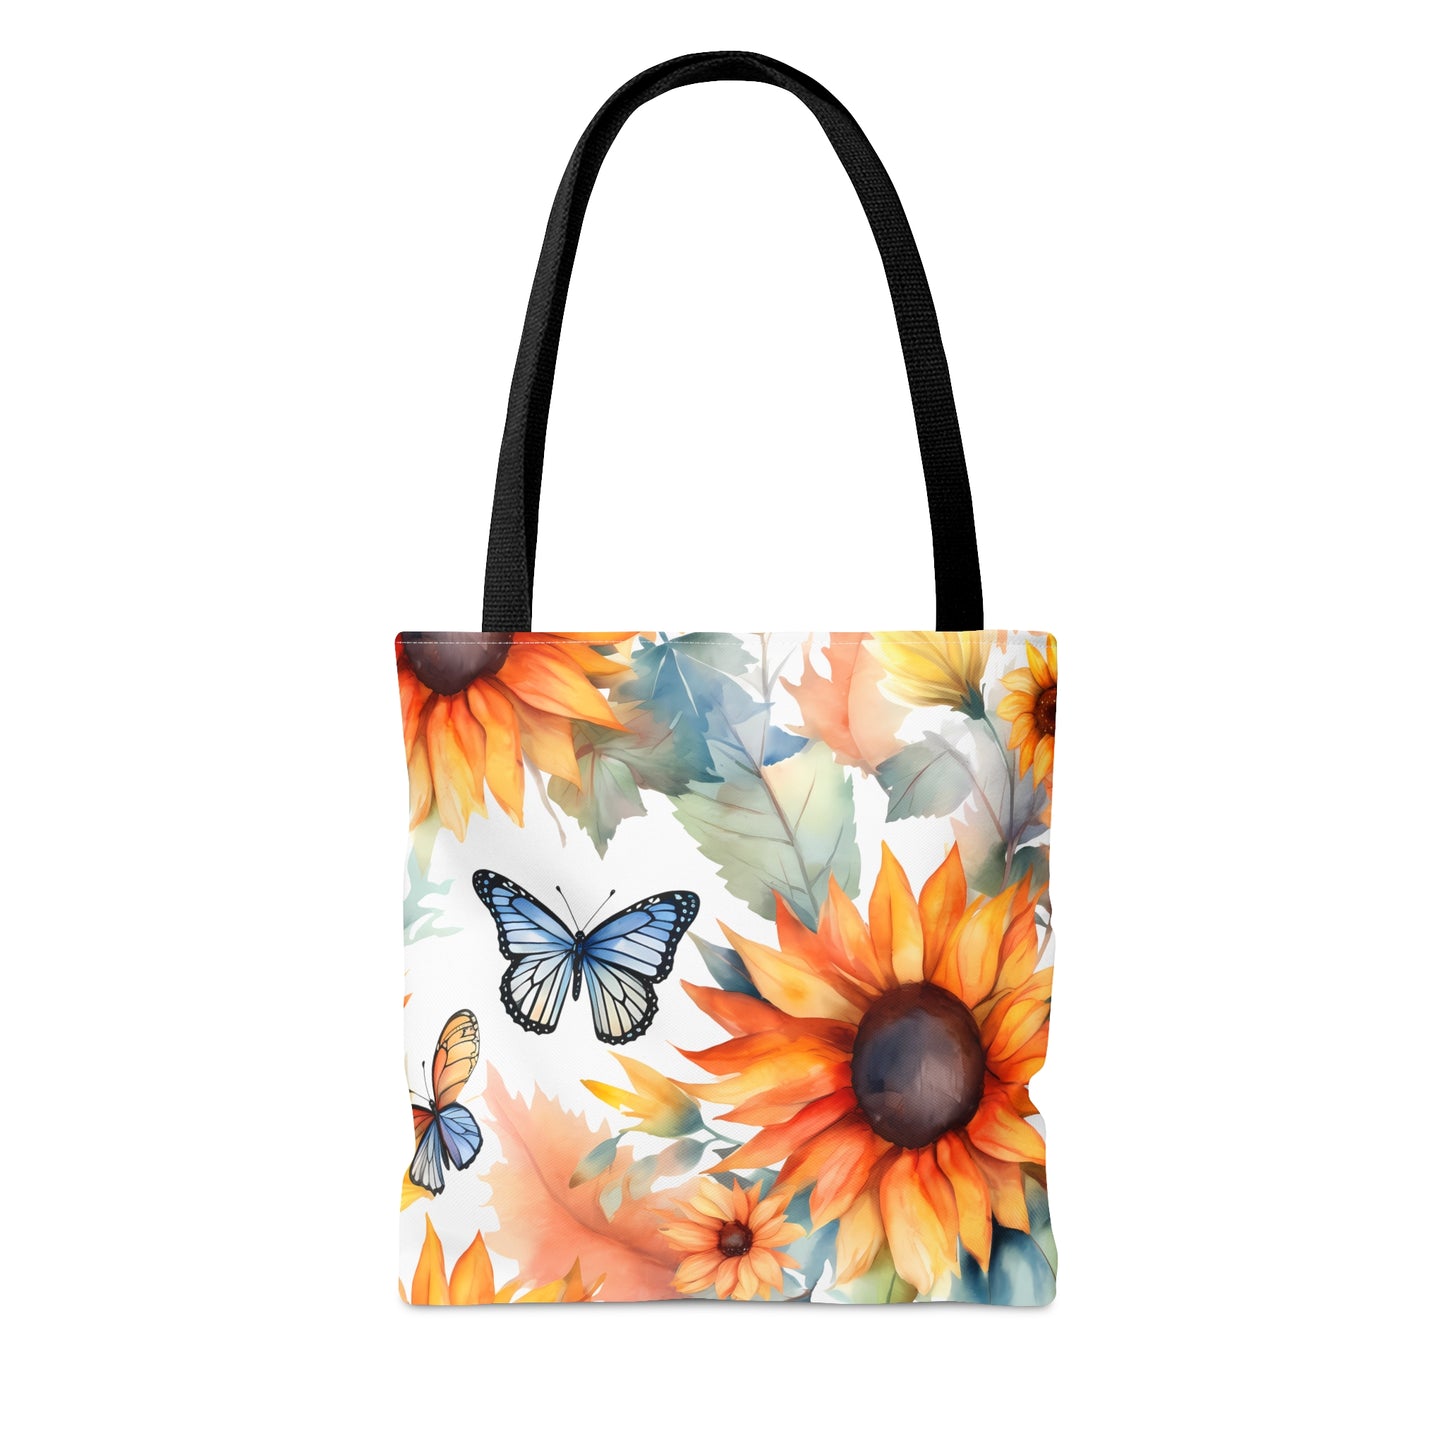 Sunflowers and Butterflies Tote Bag, Book Bag, Grocery Bag, Travel Bag, Gifts For Her, Teacher Gifts, Gifts For Mom, Colorful Tote Bag